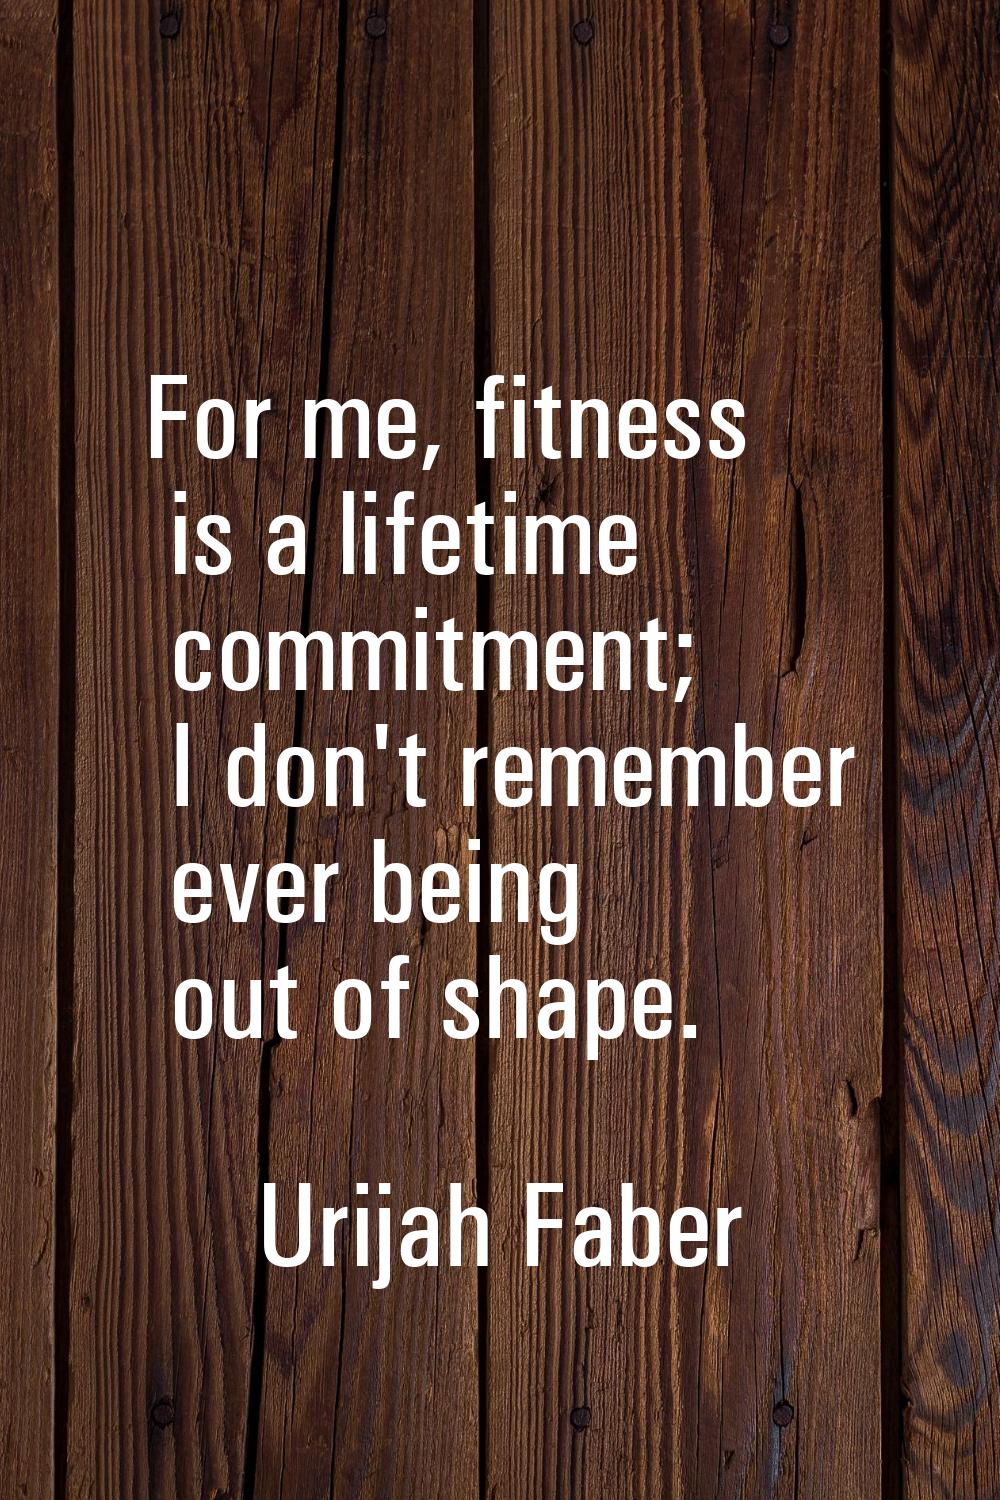 For me, fitness is a lifetime commitment; I don't remember ever being out of shape.